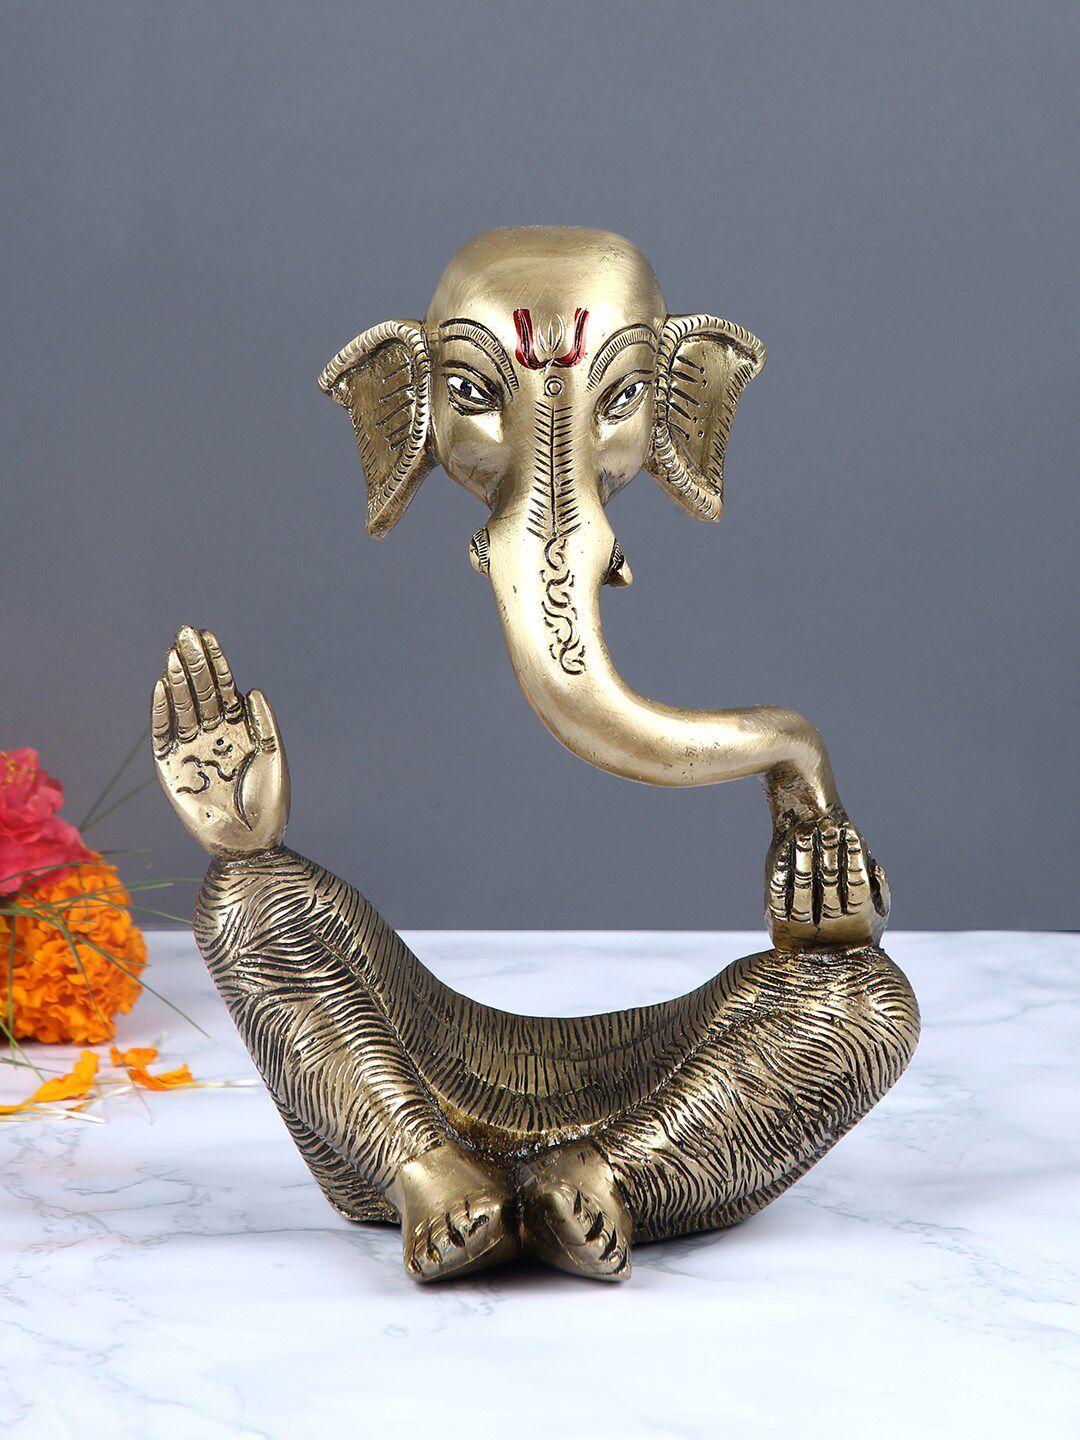 Aapno Rajasthan Gold-Toned Ganesha Statue Price in India